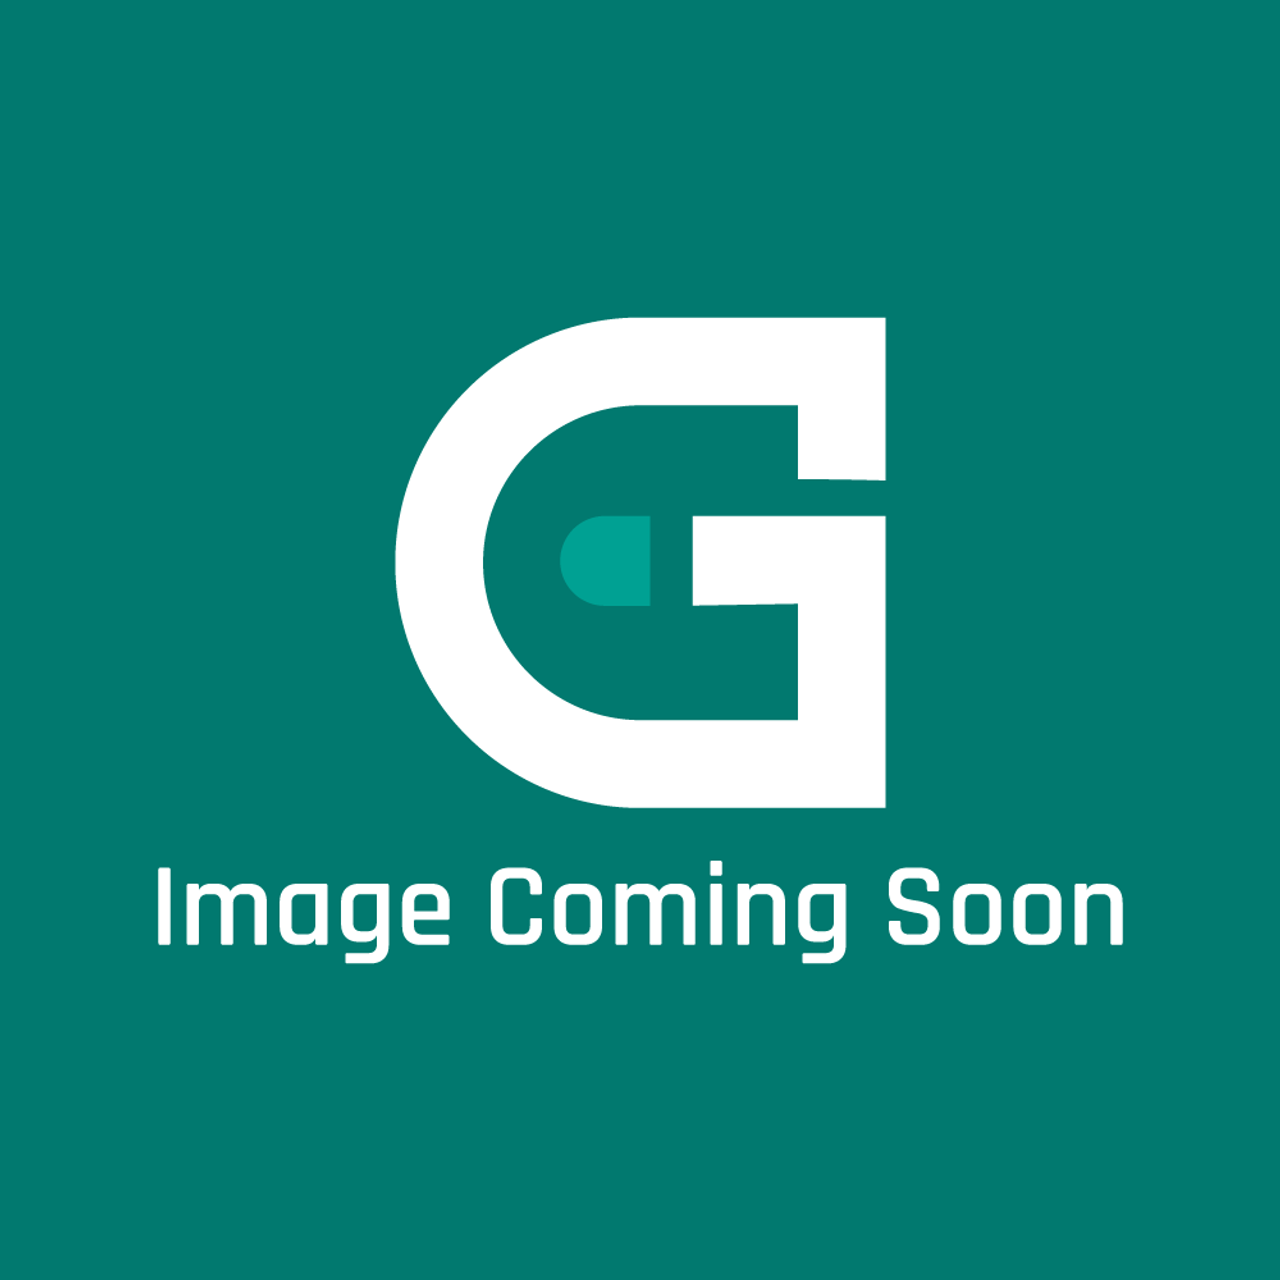 Fisher & Paykel H003-0070200453 - Socket Lamp - Image Coming Soon!